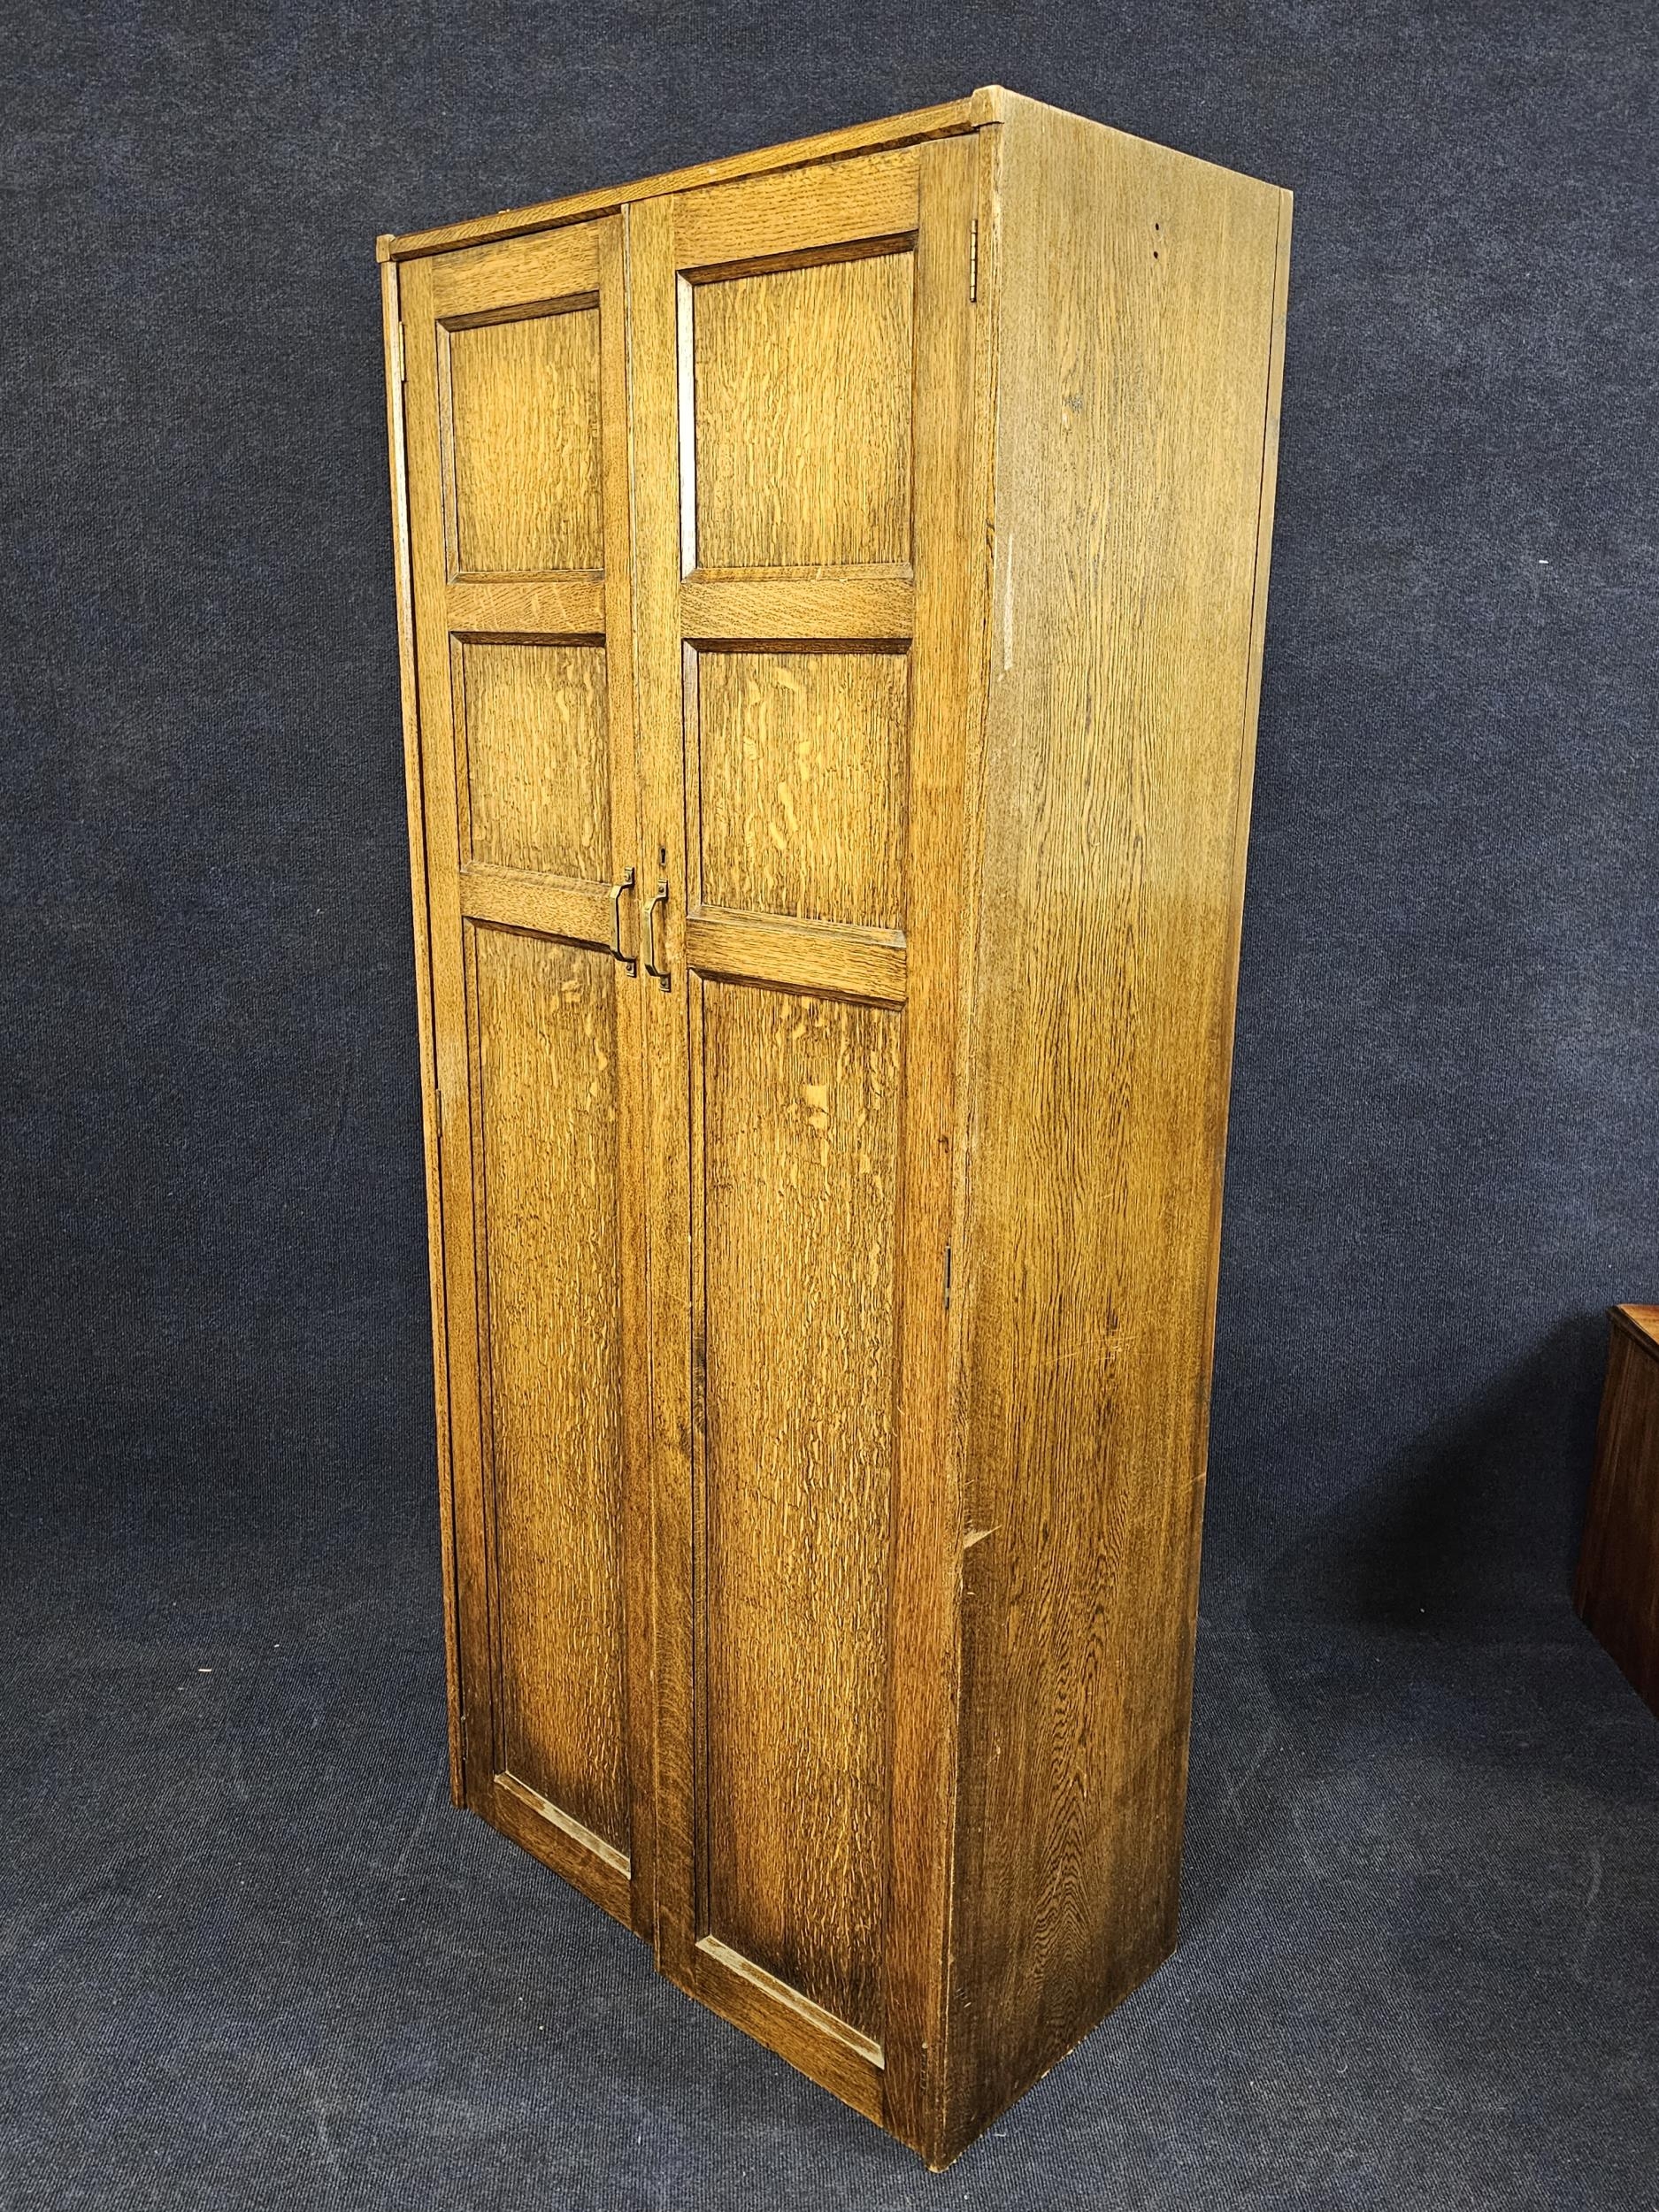 A narrow oak wardrobe, first half 20th century with maker's label. H.73 W.76 D.40cm. - Image 2 of 7